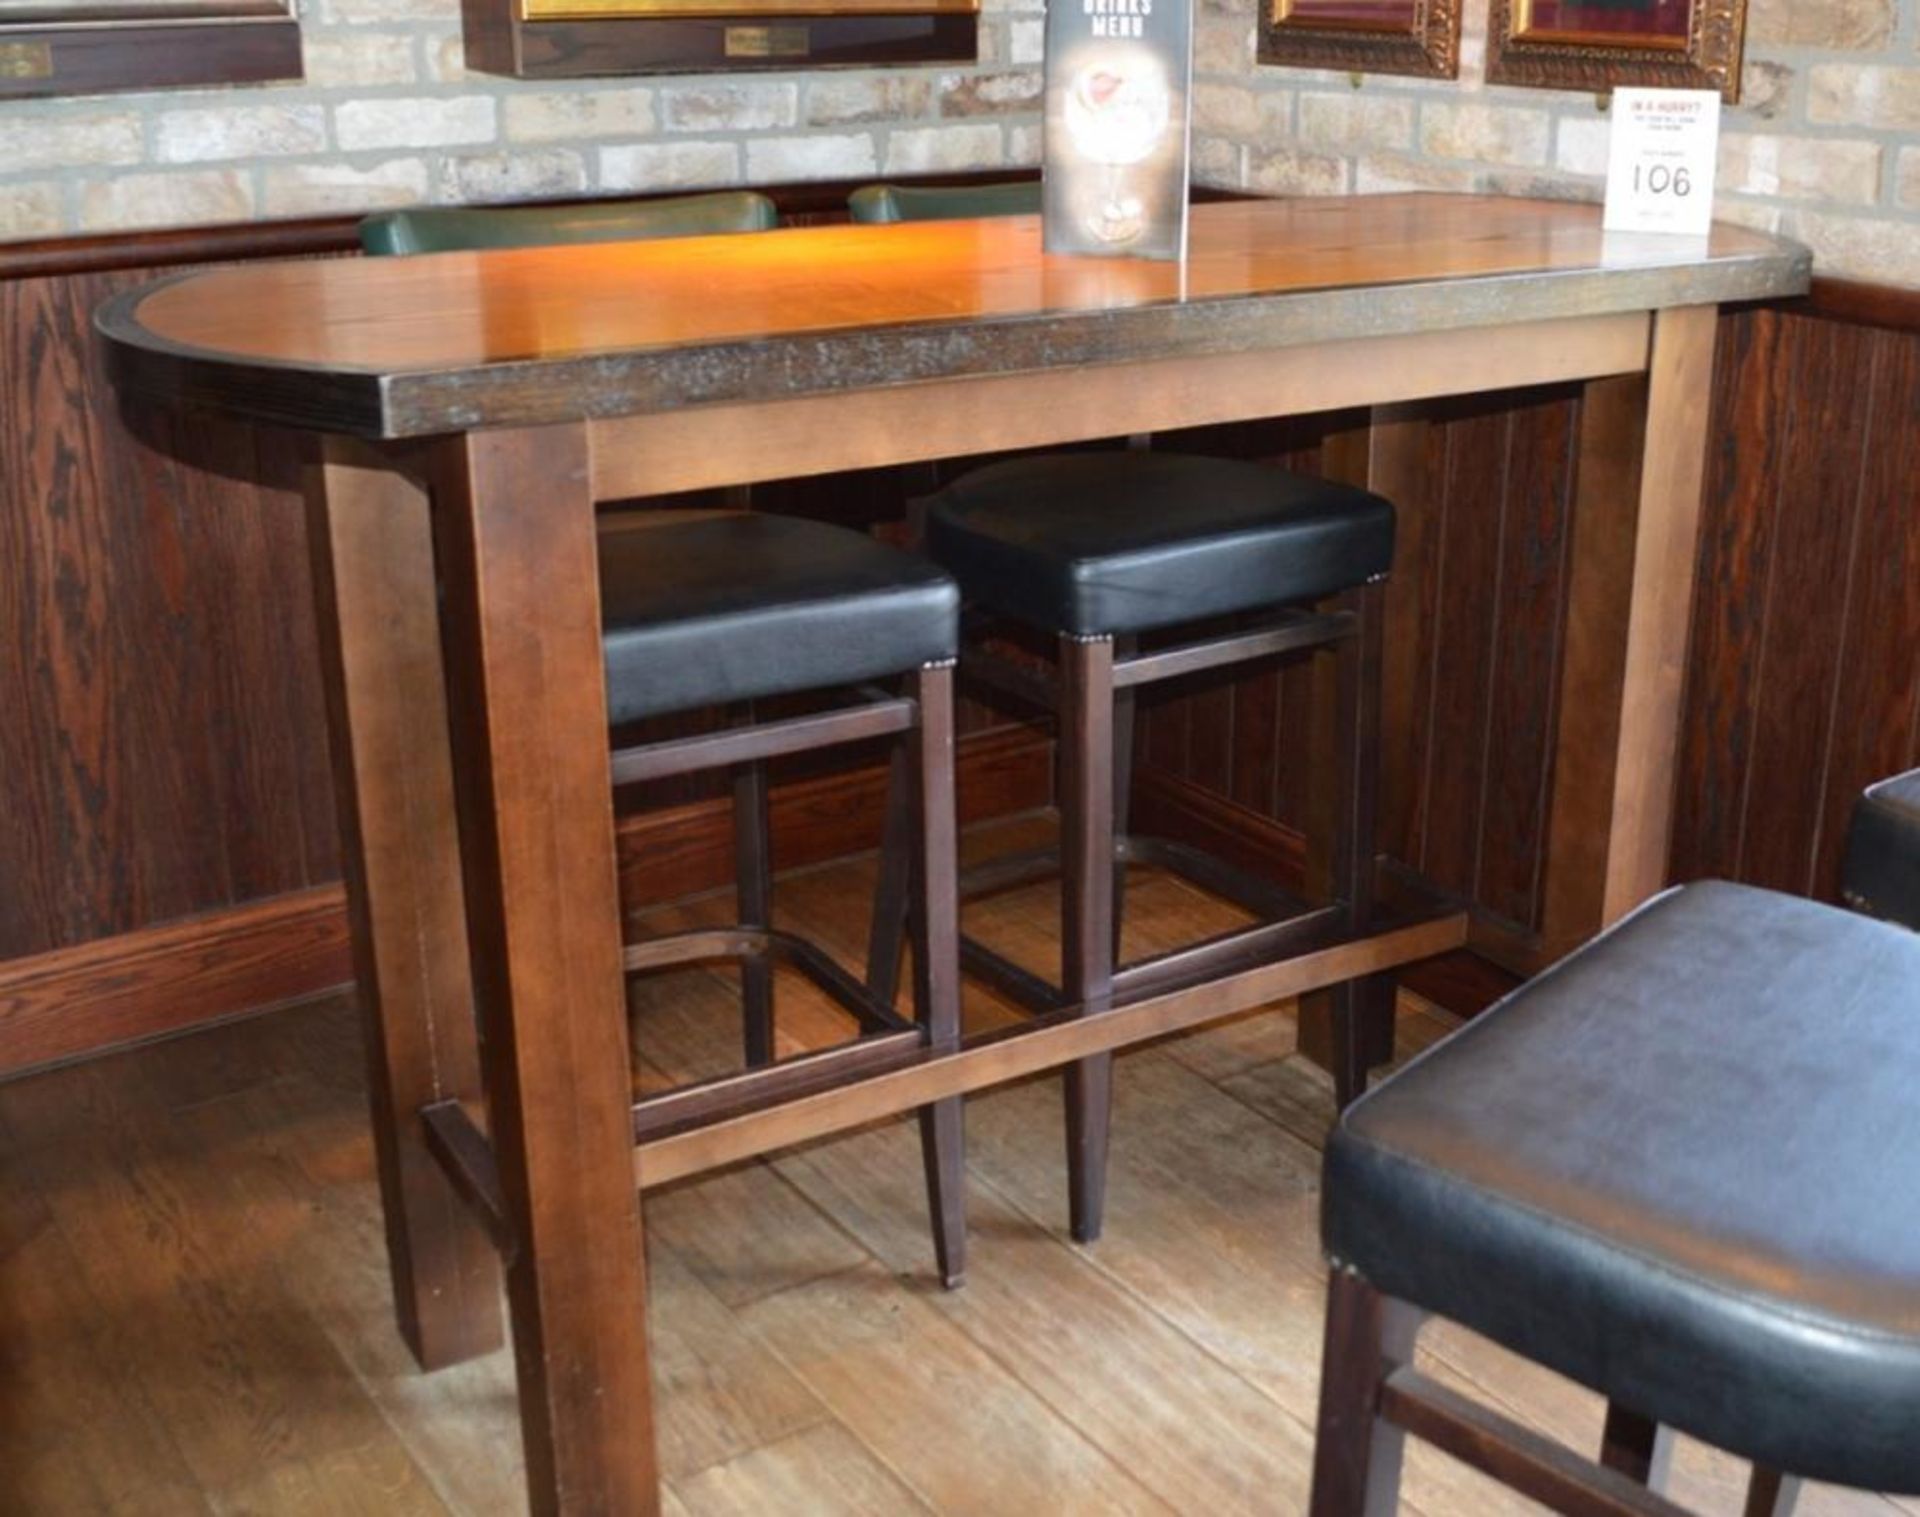 1 x Rectangular Poser Table With Four Contemporary Bar Stools - Stunning Finish With Straight and - Image 7 of 8